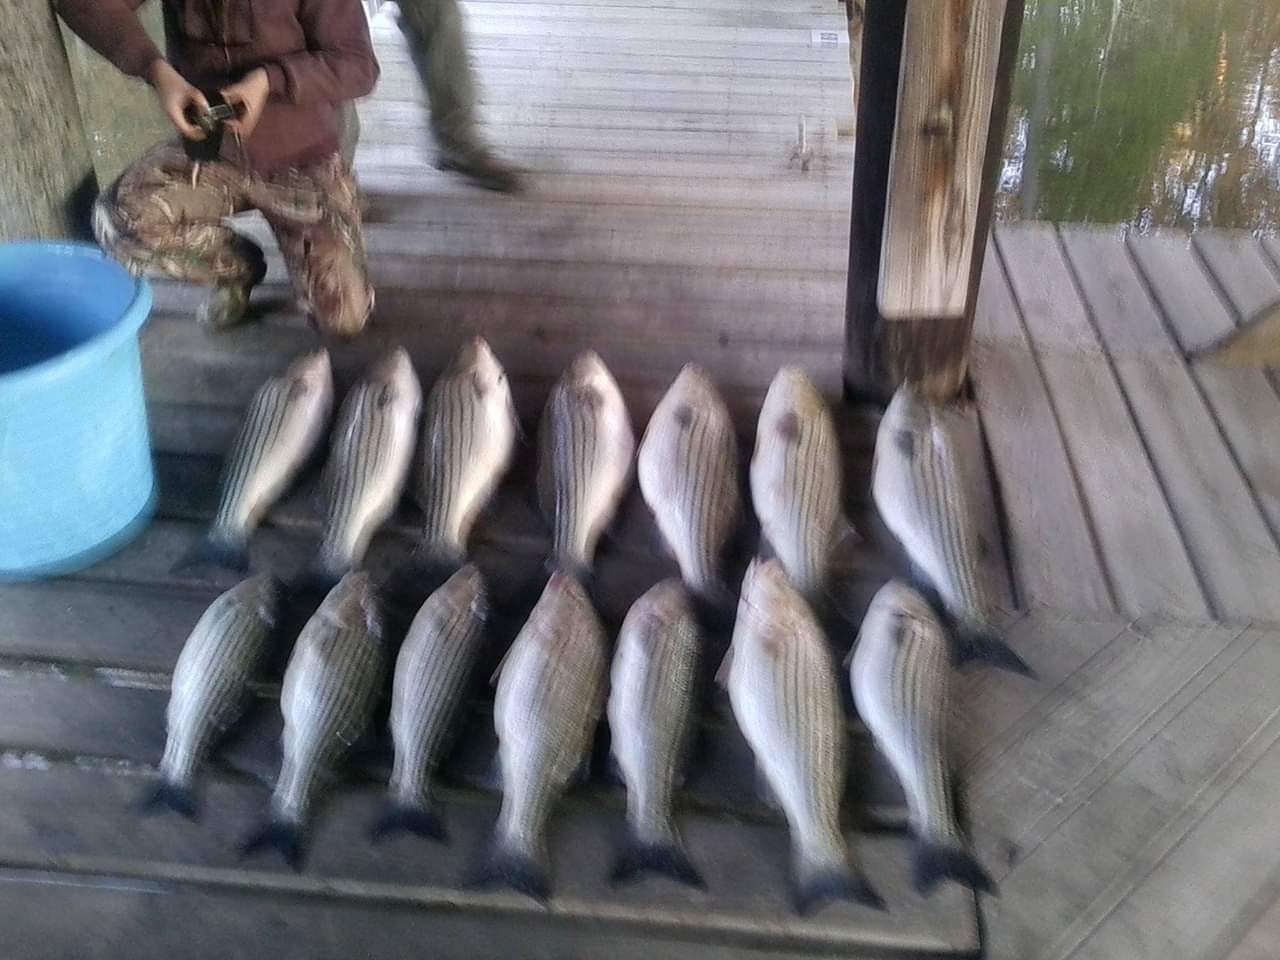 Fourteen fish lined up on the dock